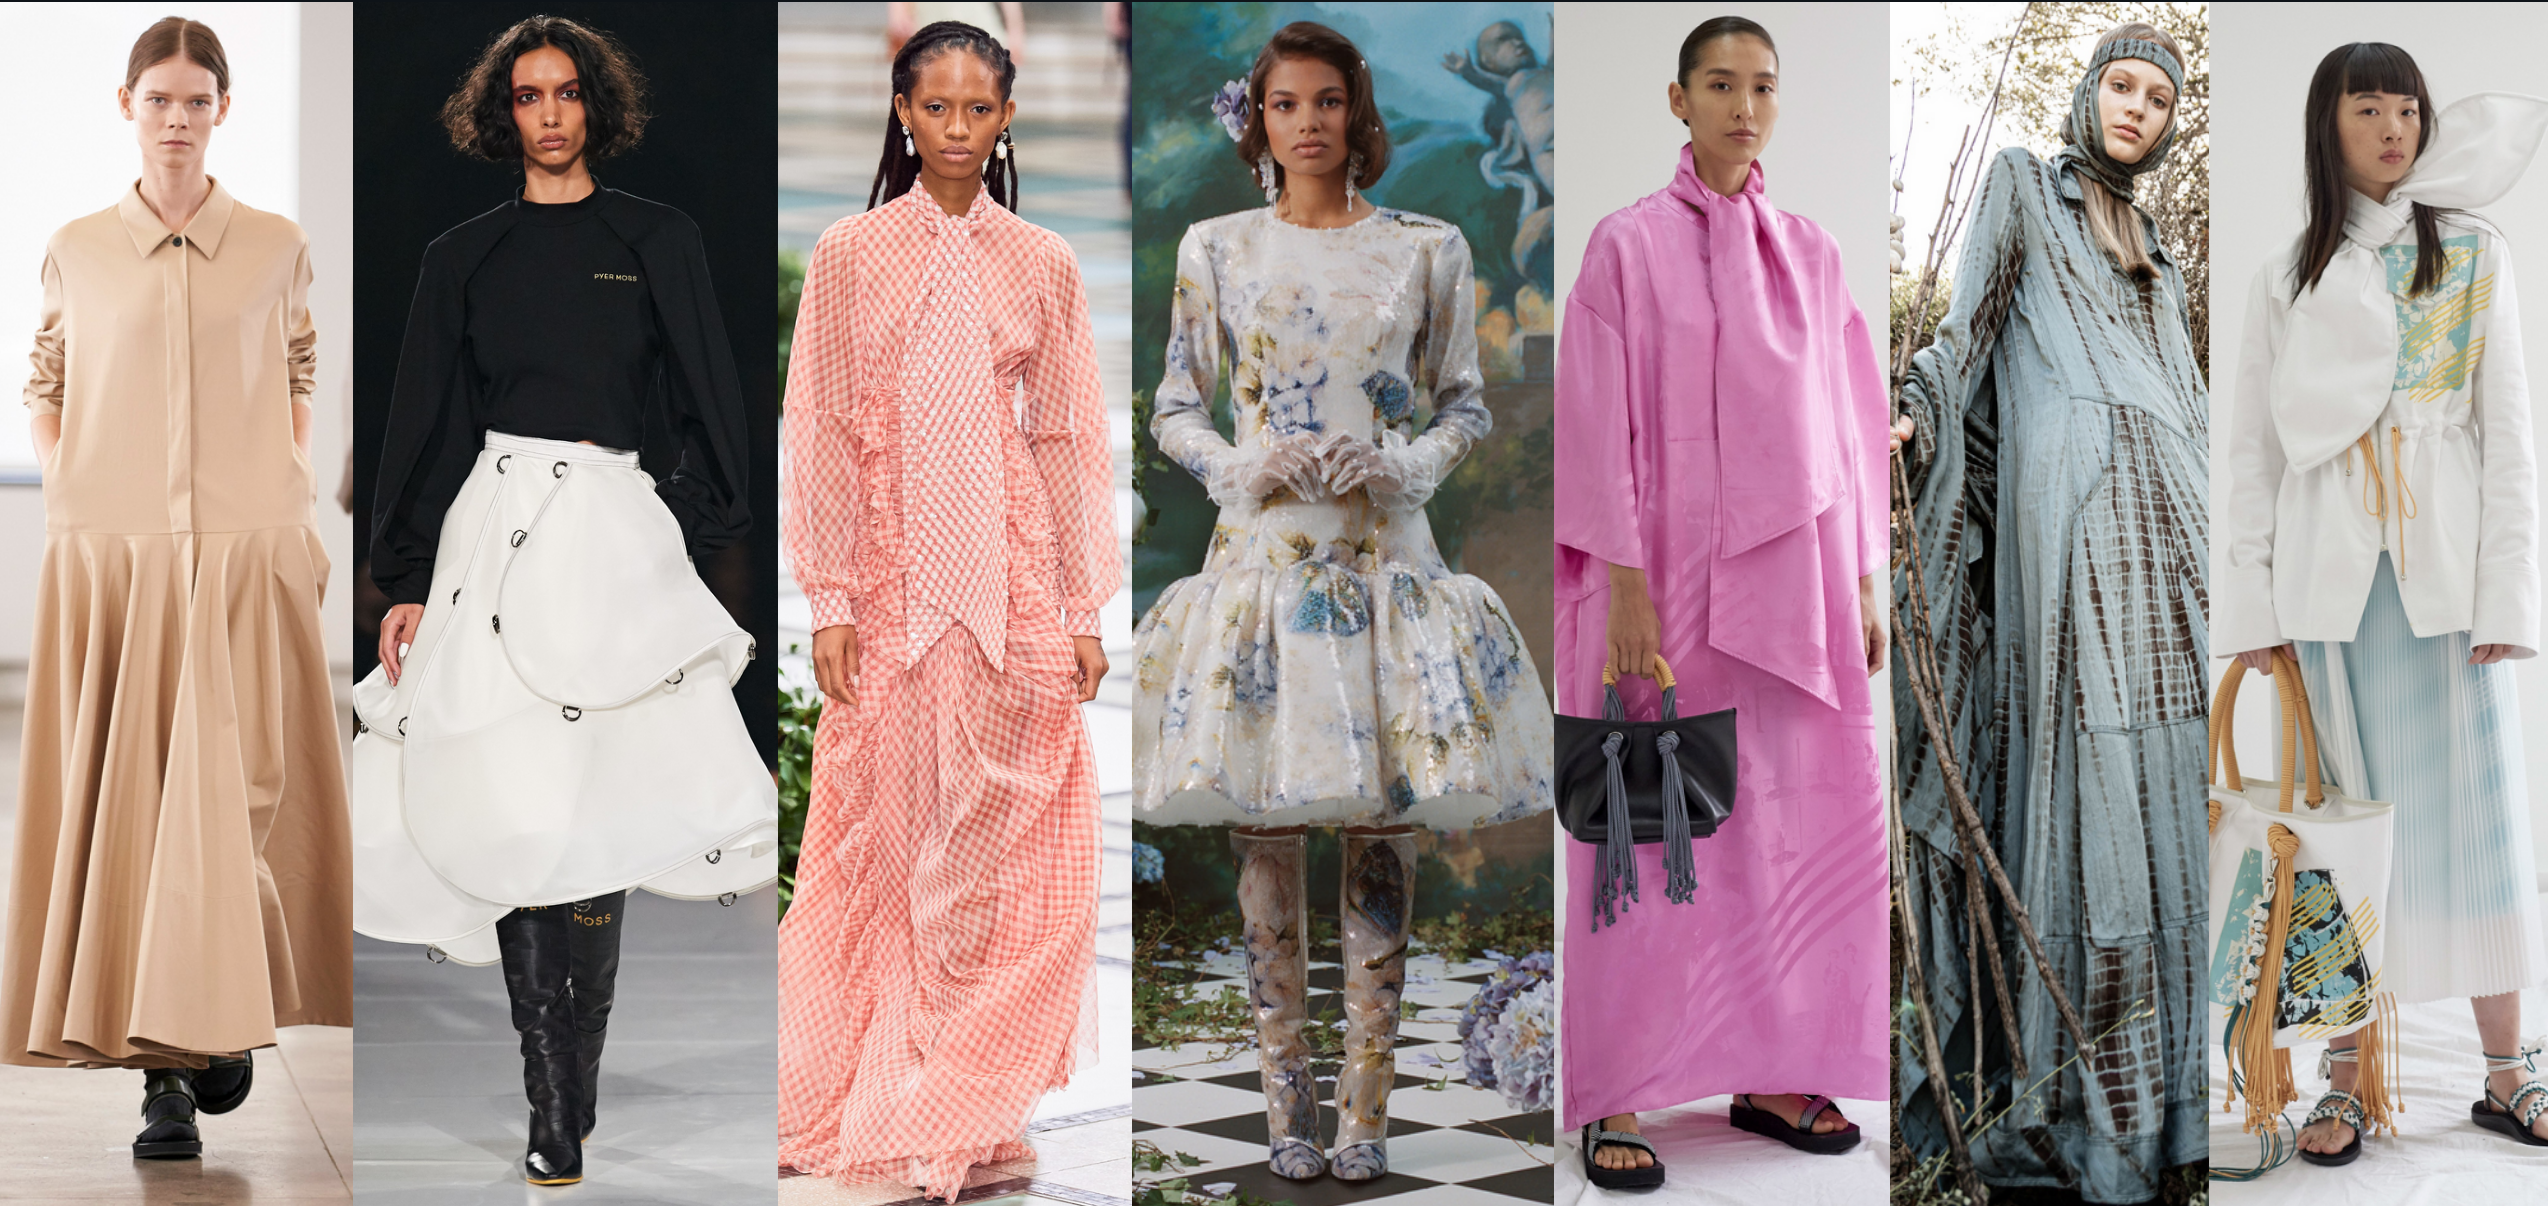 The Top Ten Modest Trends From Spring 2020 Fashion Week - Jew in the City